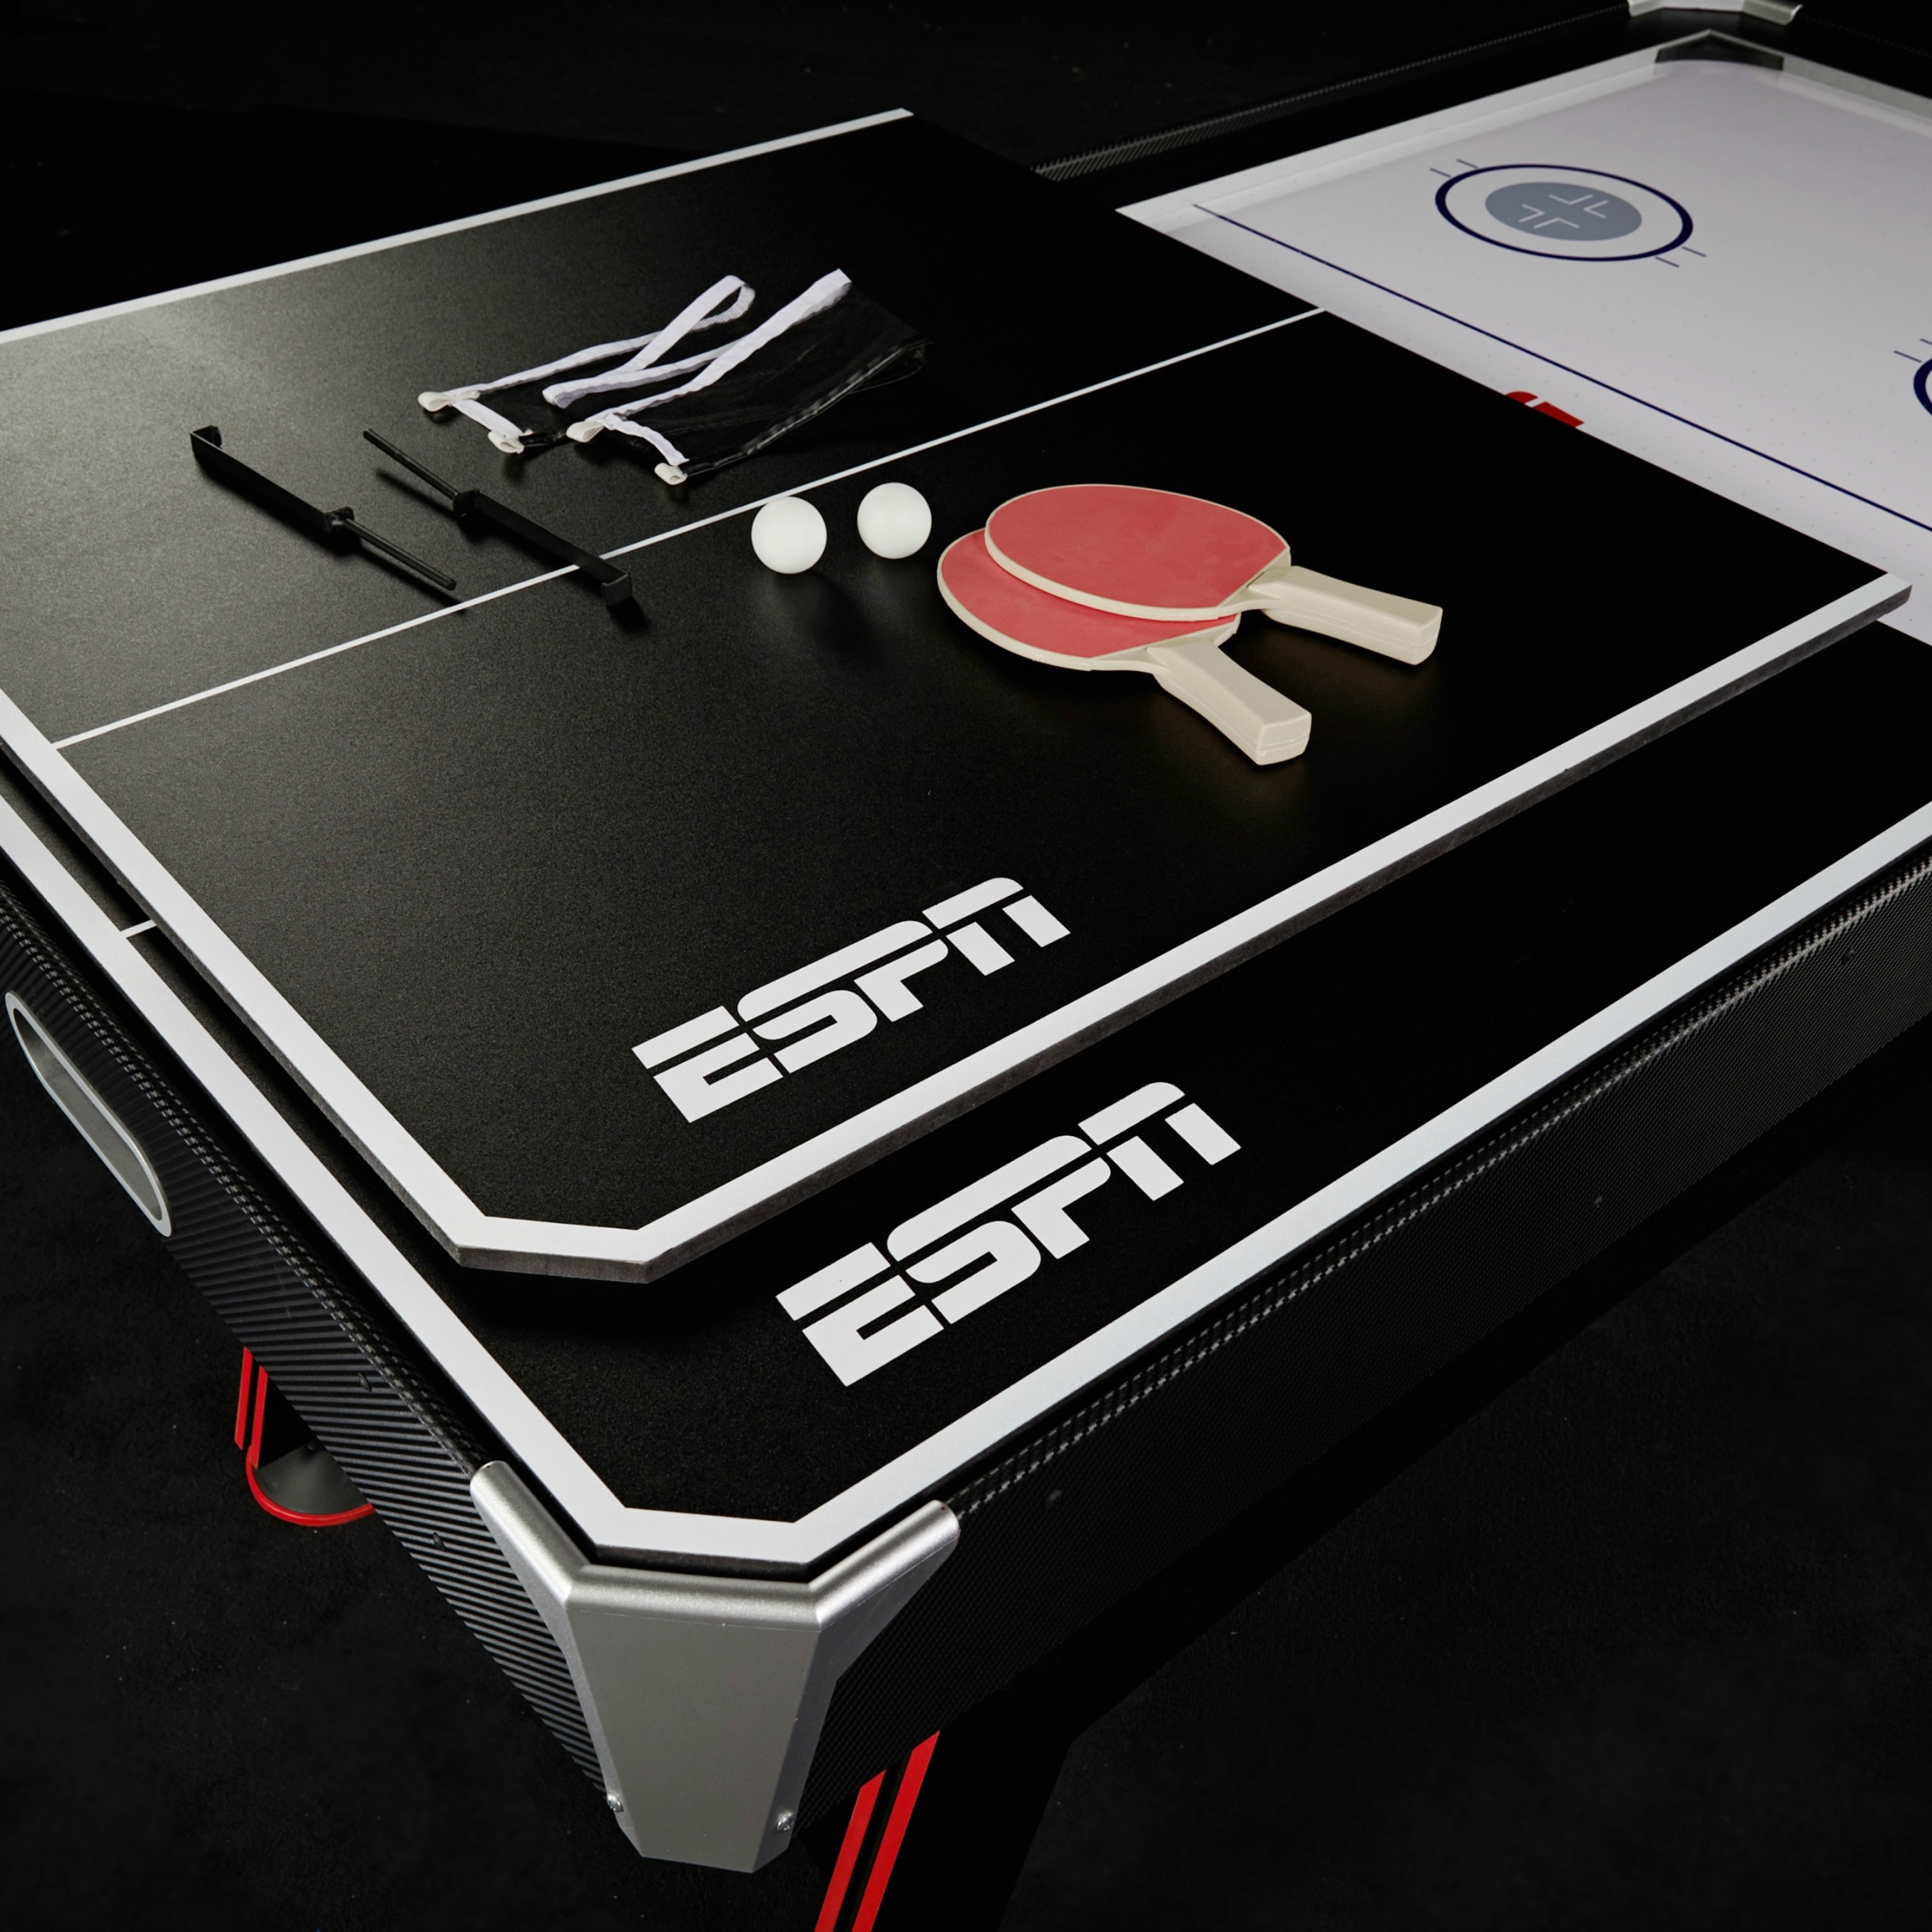 Walmart ESPN Large 2-in-1 Air Hockey and Tennis Table $126.34 (Regularly $193)